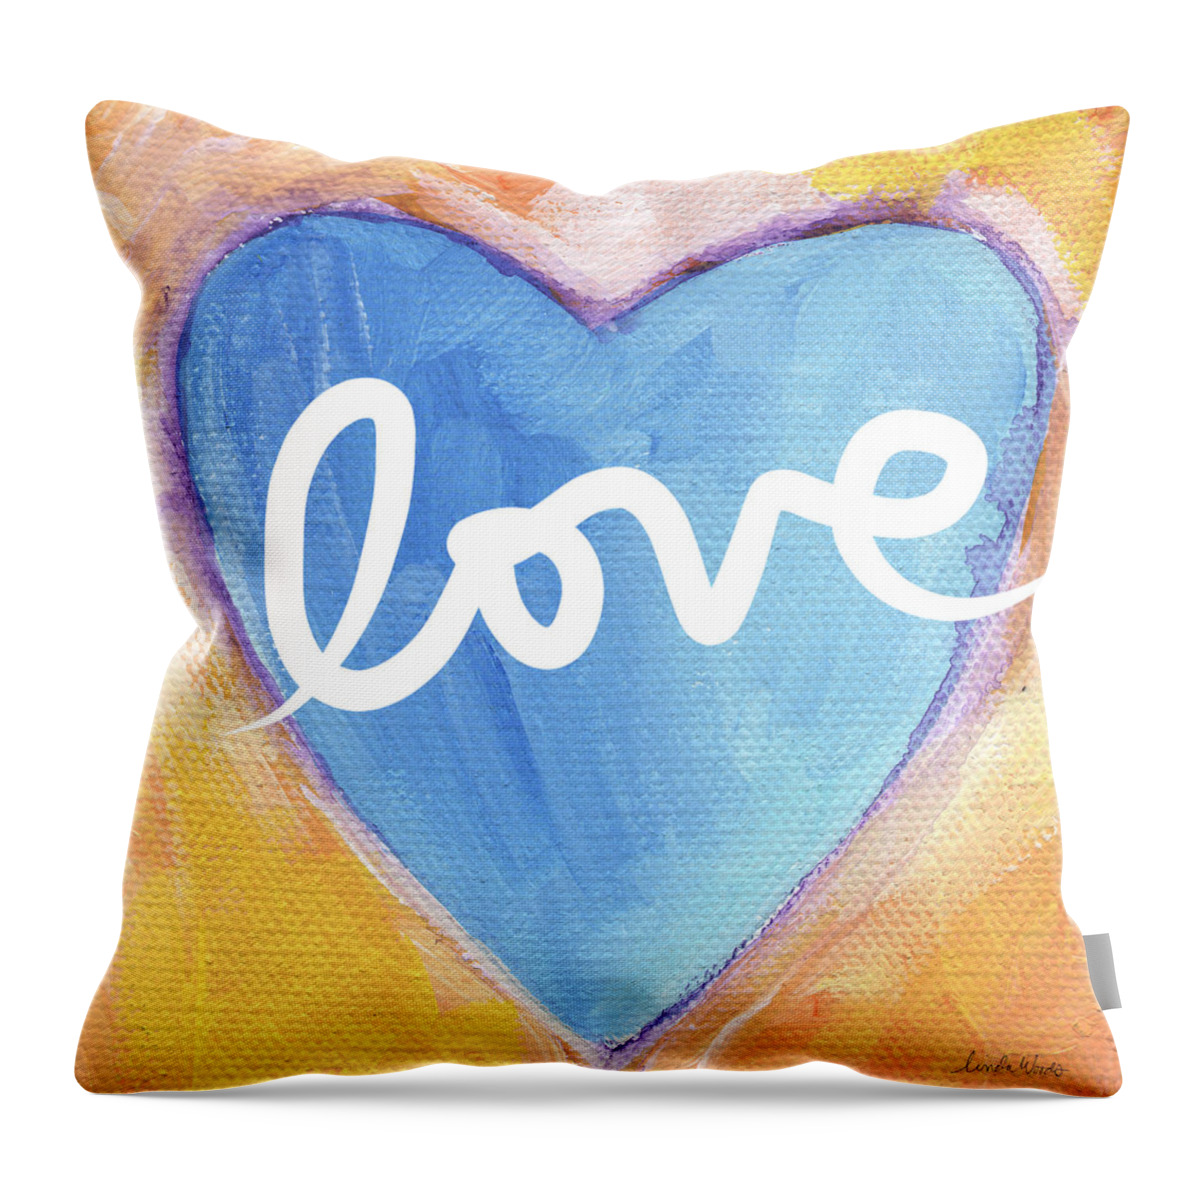 Love Throw Pillow featuring the painting Bright Love by Linda Woods